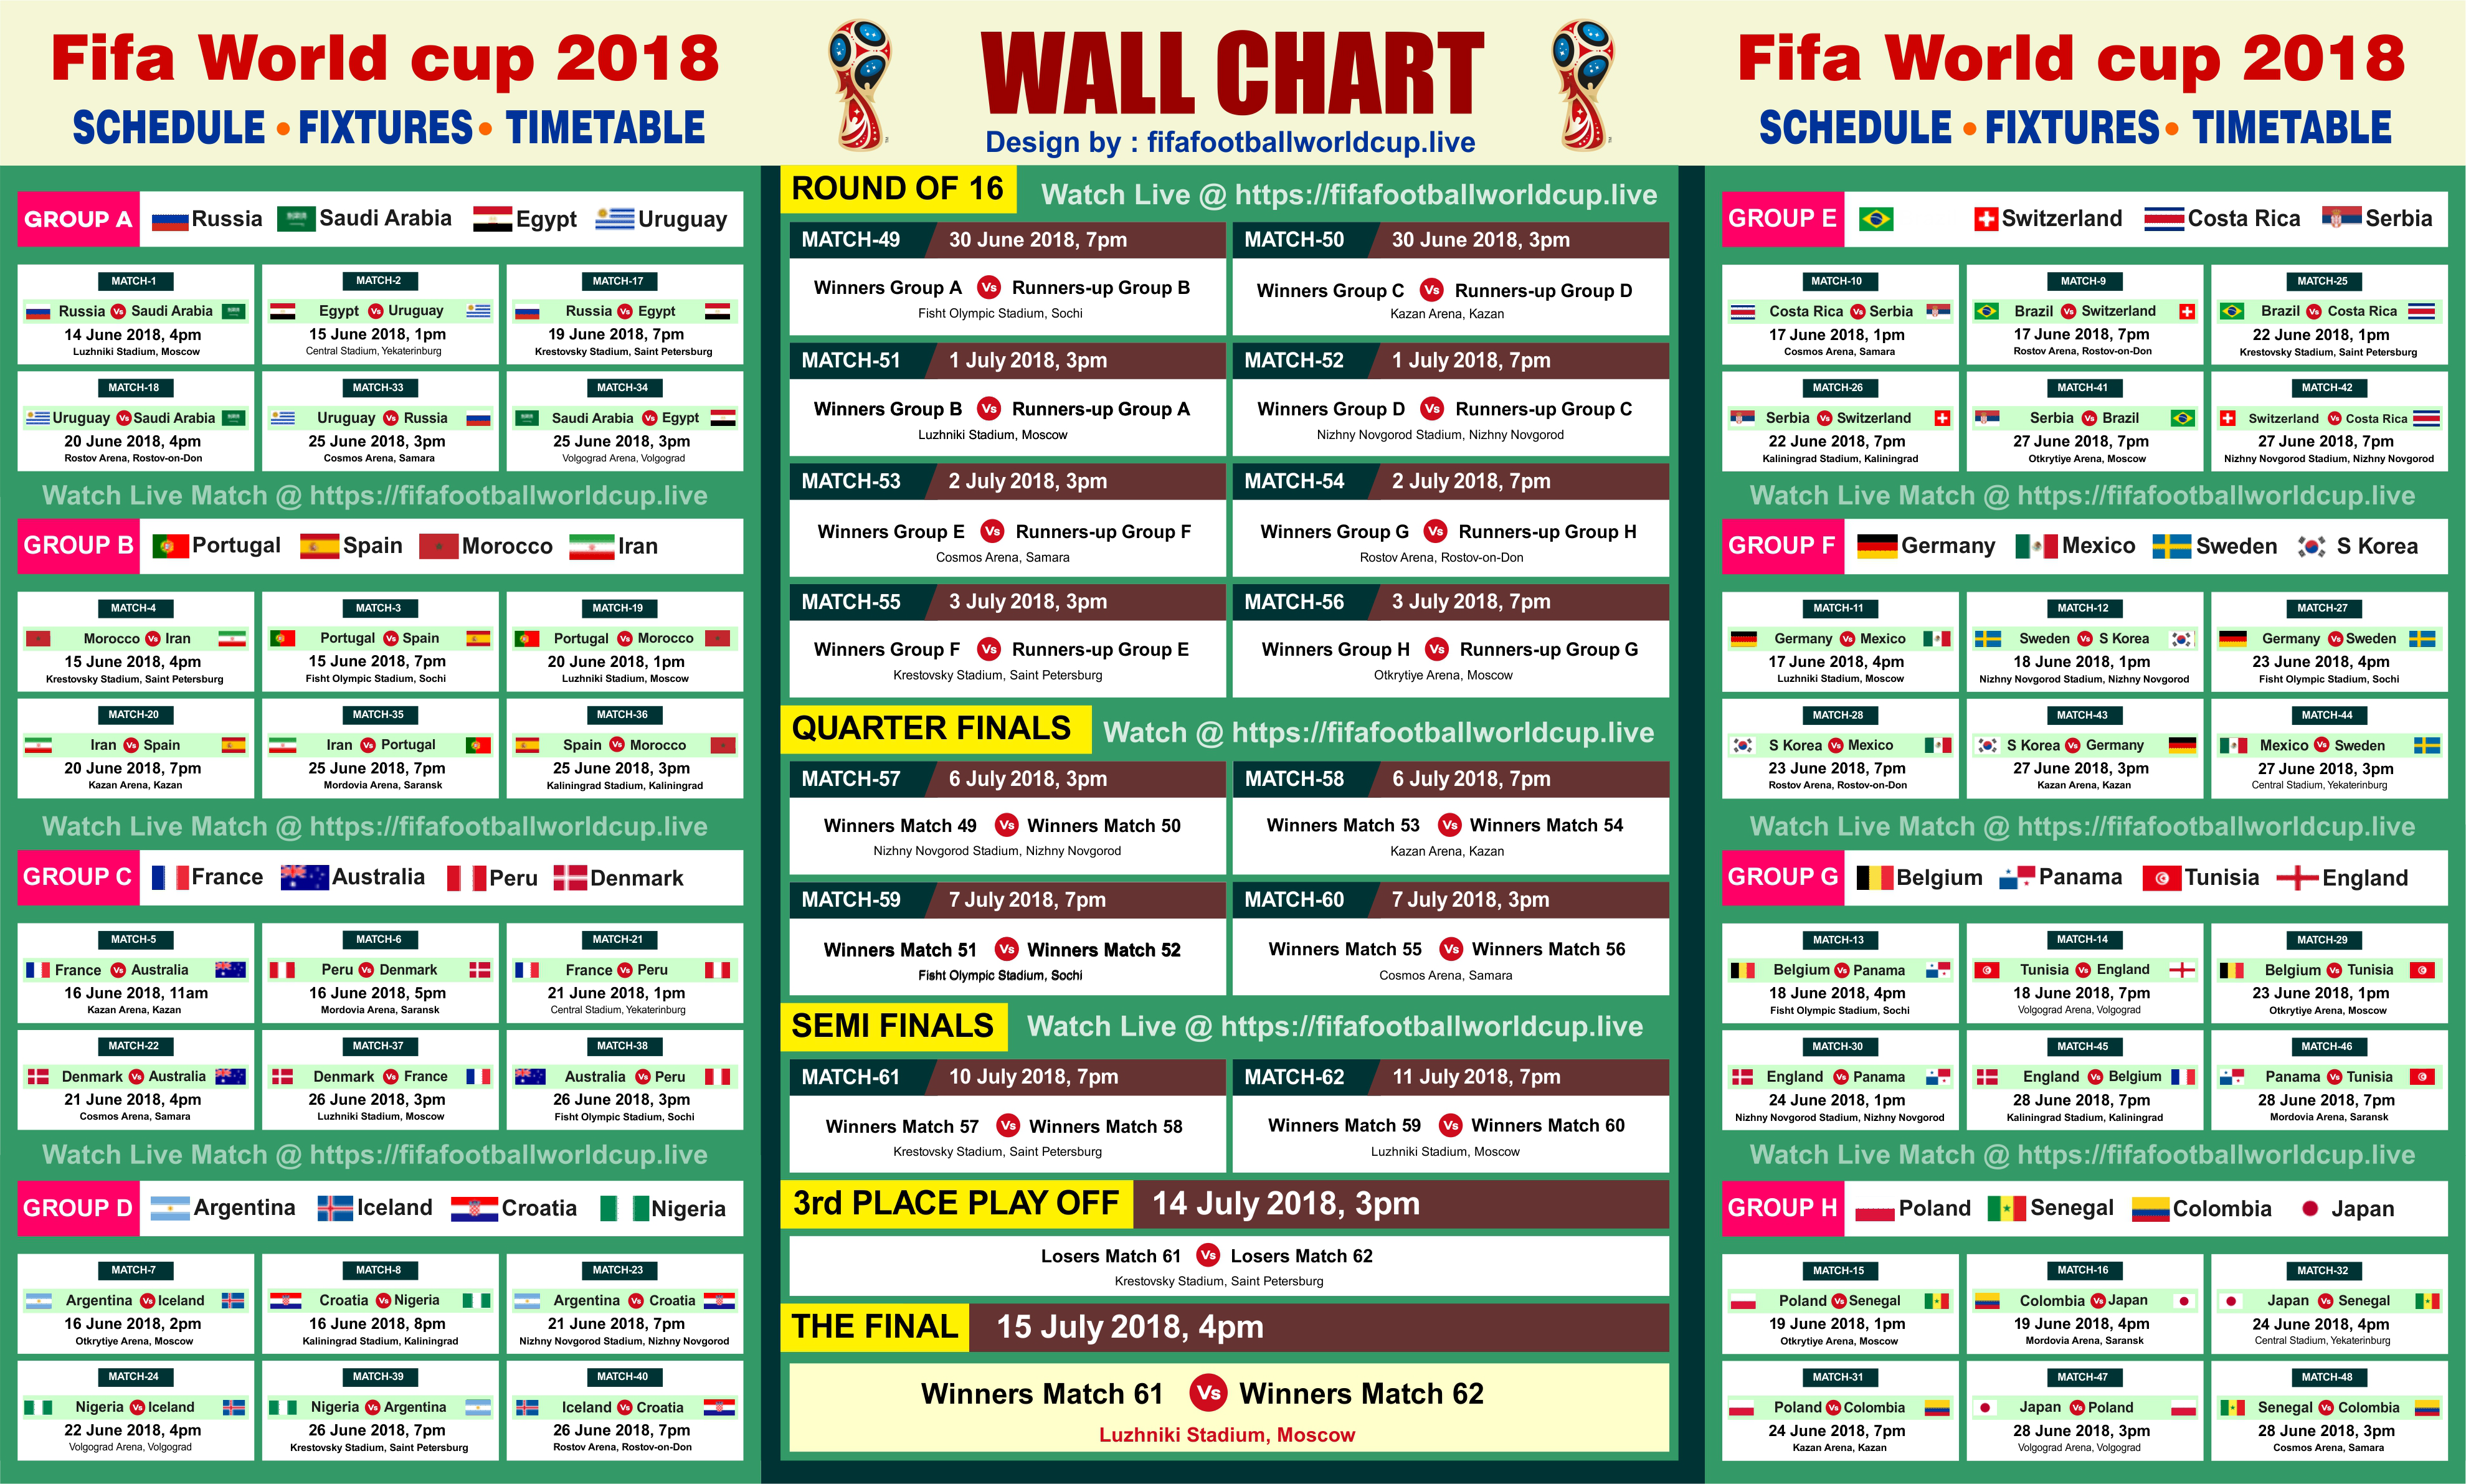 Printable Fifa World cup 2018 Schedule in Eye Catche Design of Round of 16, Quarter Final, Semi Final and Final match